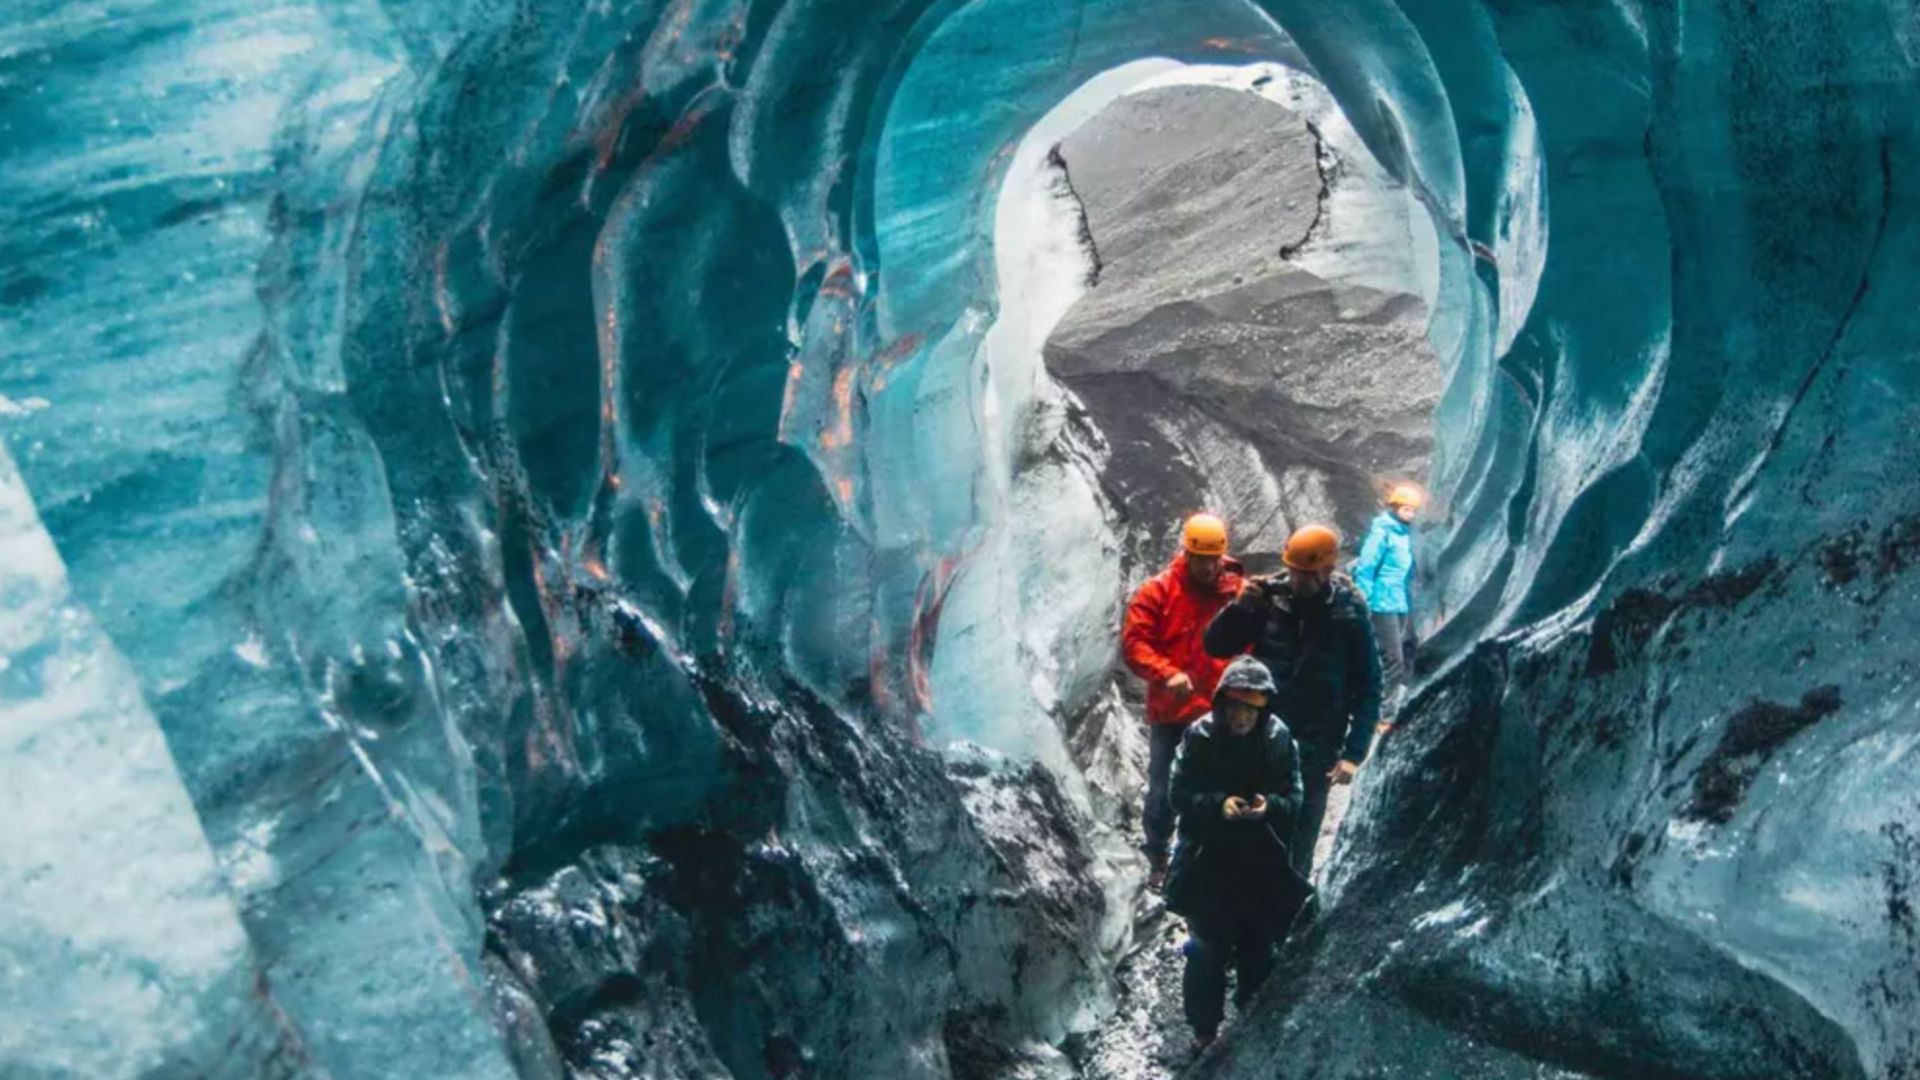 The Katla Ice Cave in South Iceland